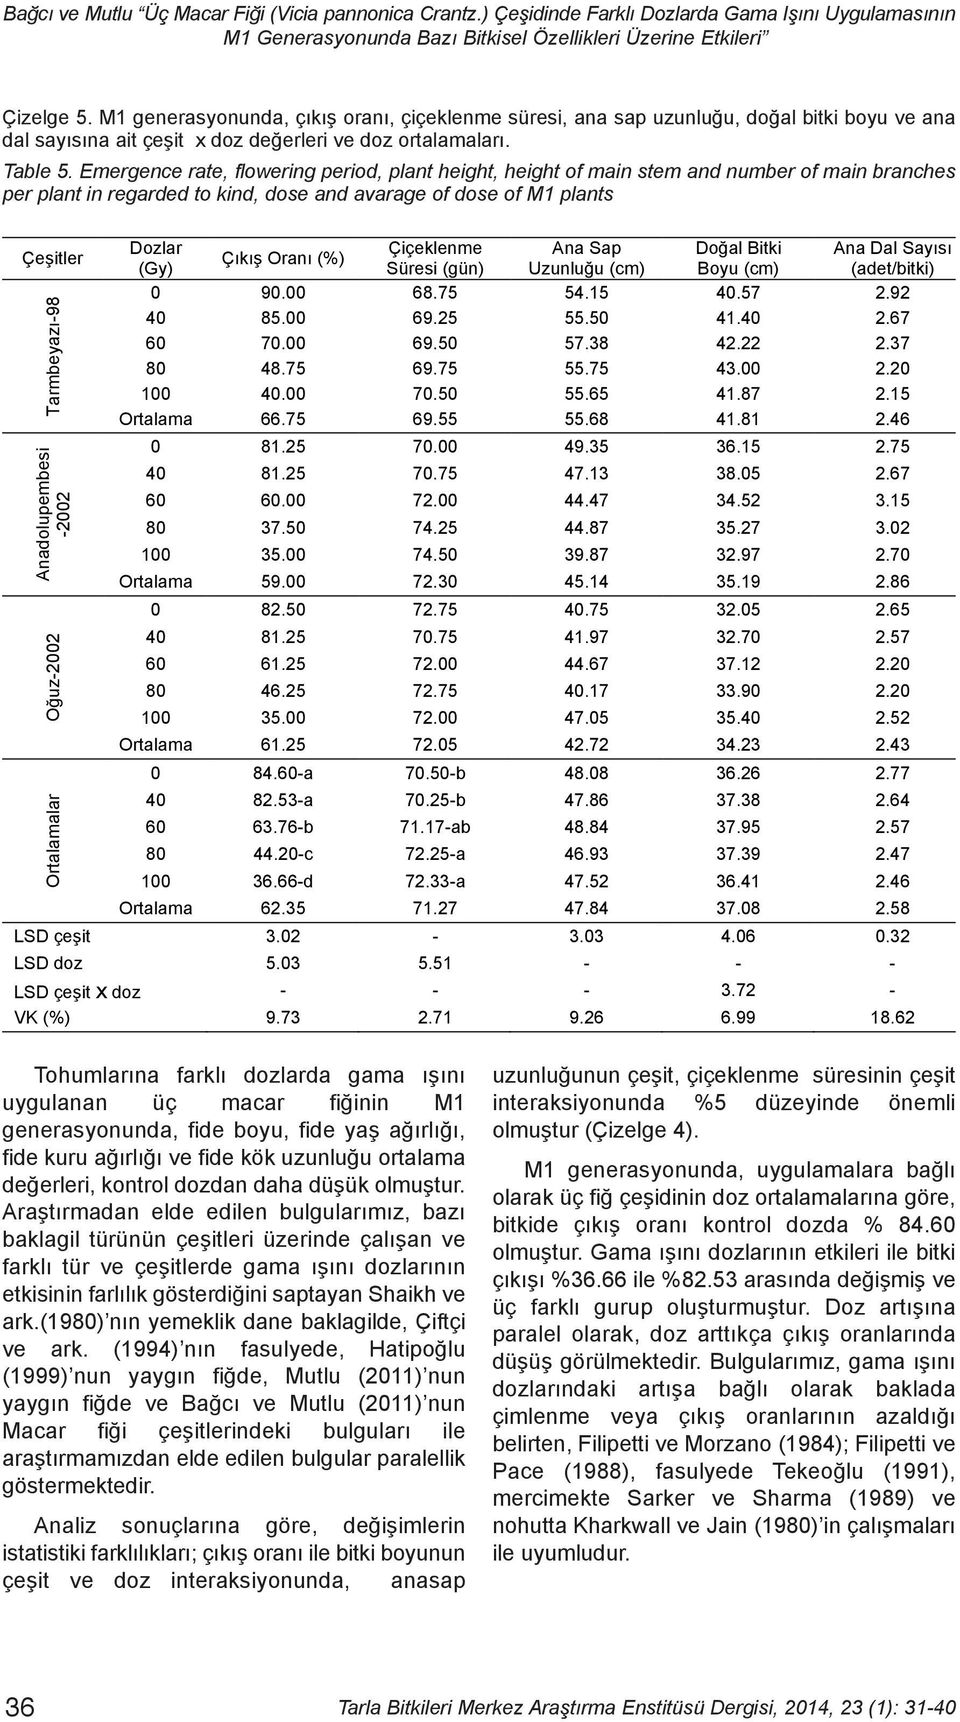 Emergence rate, flowering period, plant height, height of main stem and number of main branches per plant in regarded to kind, dose and avarage of dose of M1 plants Çeflitler Dozlar Çiçeklenme Ana